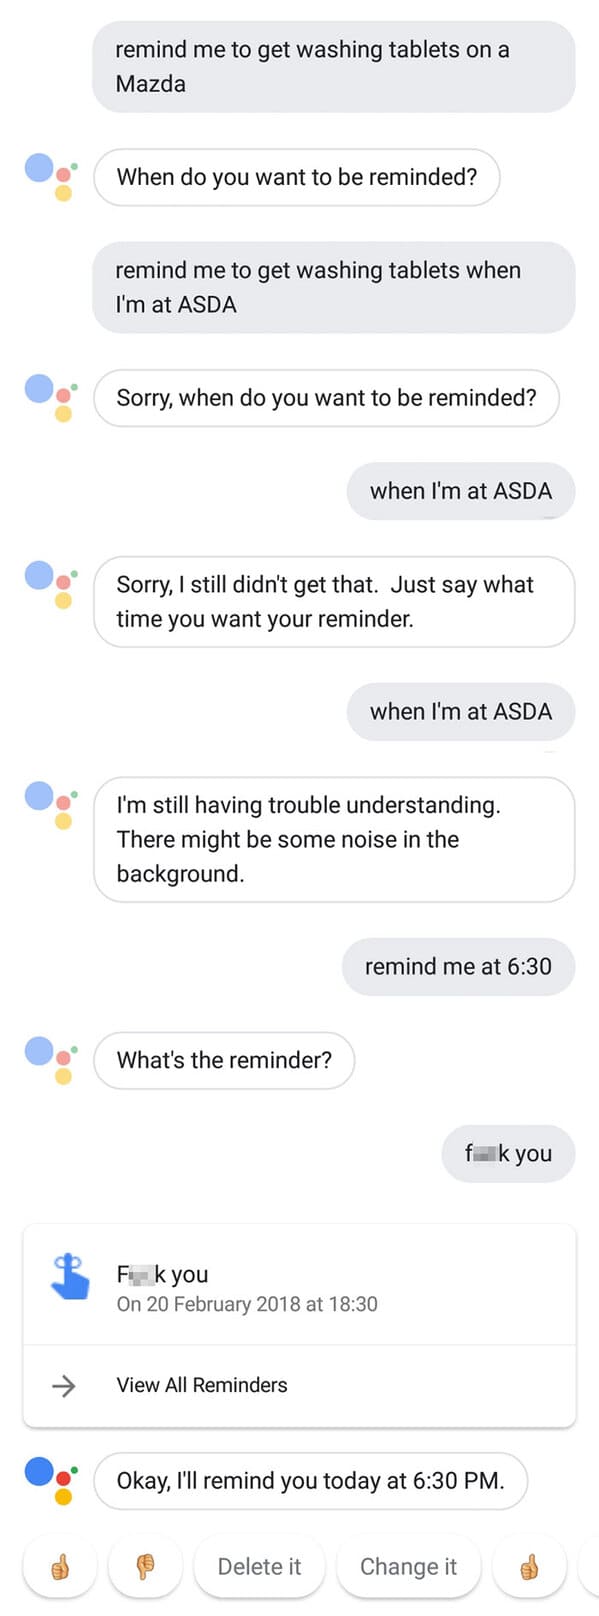 funny computer glitch reddit - remind me to get washing tablets on a Mazda When do you want to be reminded? remind me to get washing tablets when I'm at Asda Sorry, when do you want to be reminded? when I'm at Asda Sorry, I still didn't get that. Just say